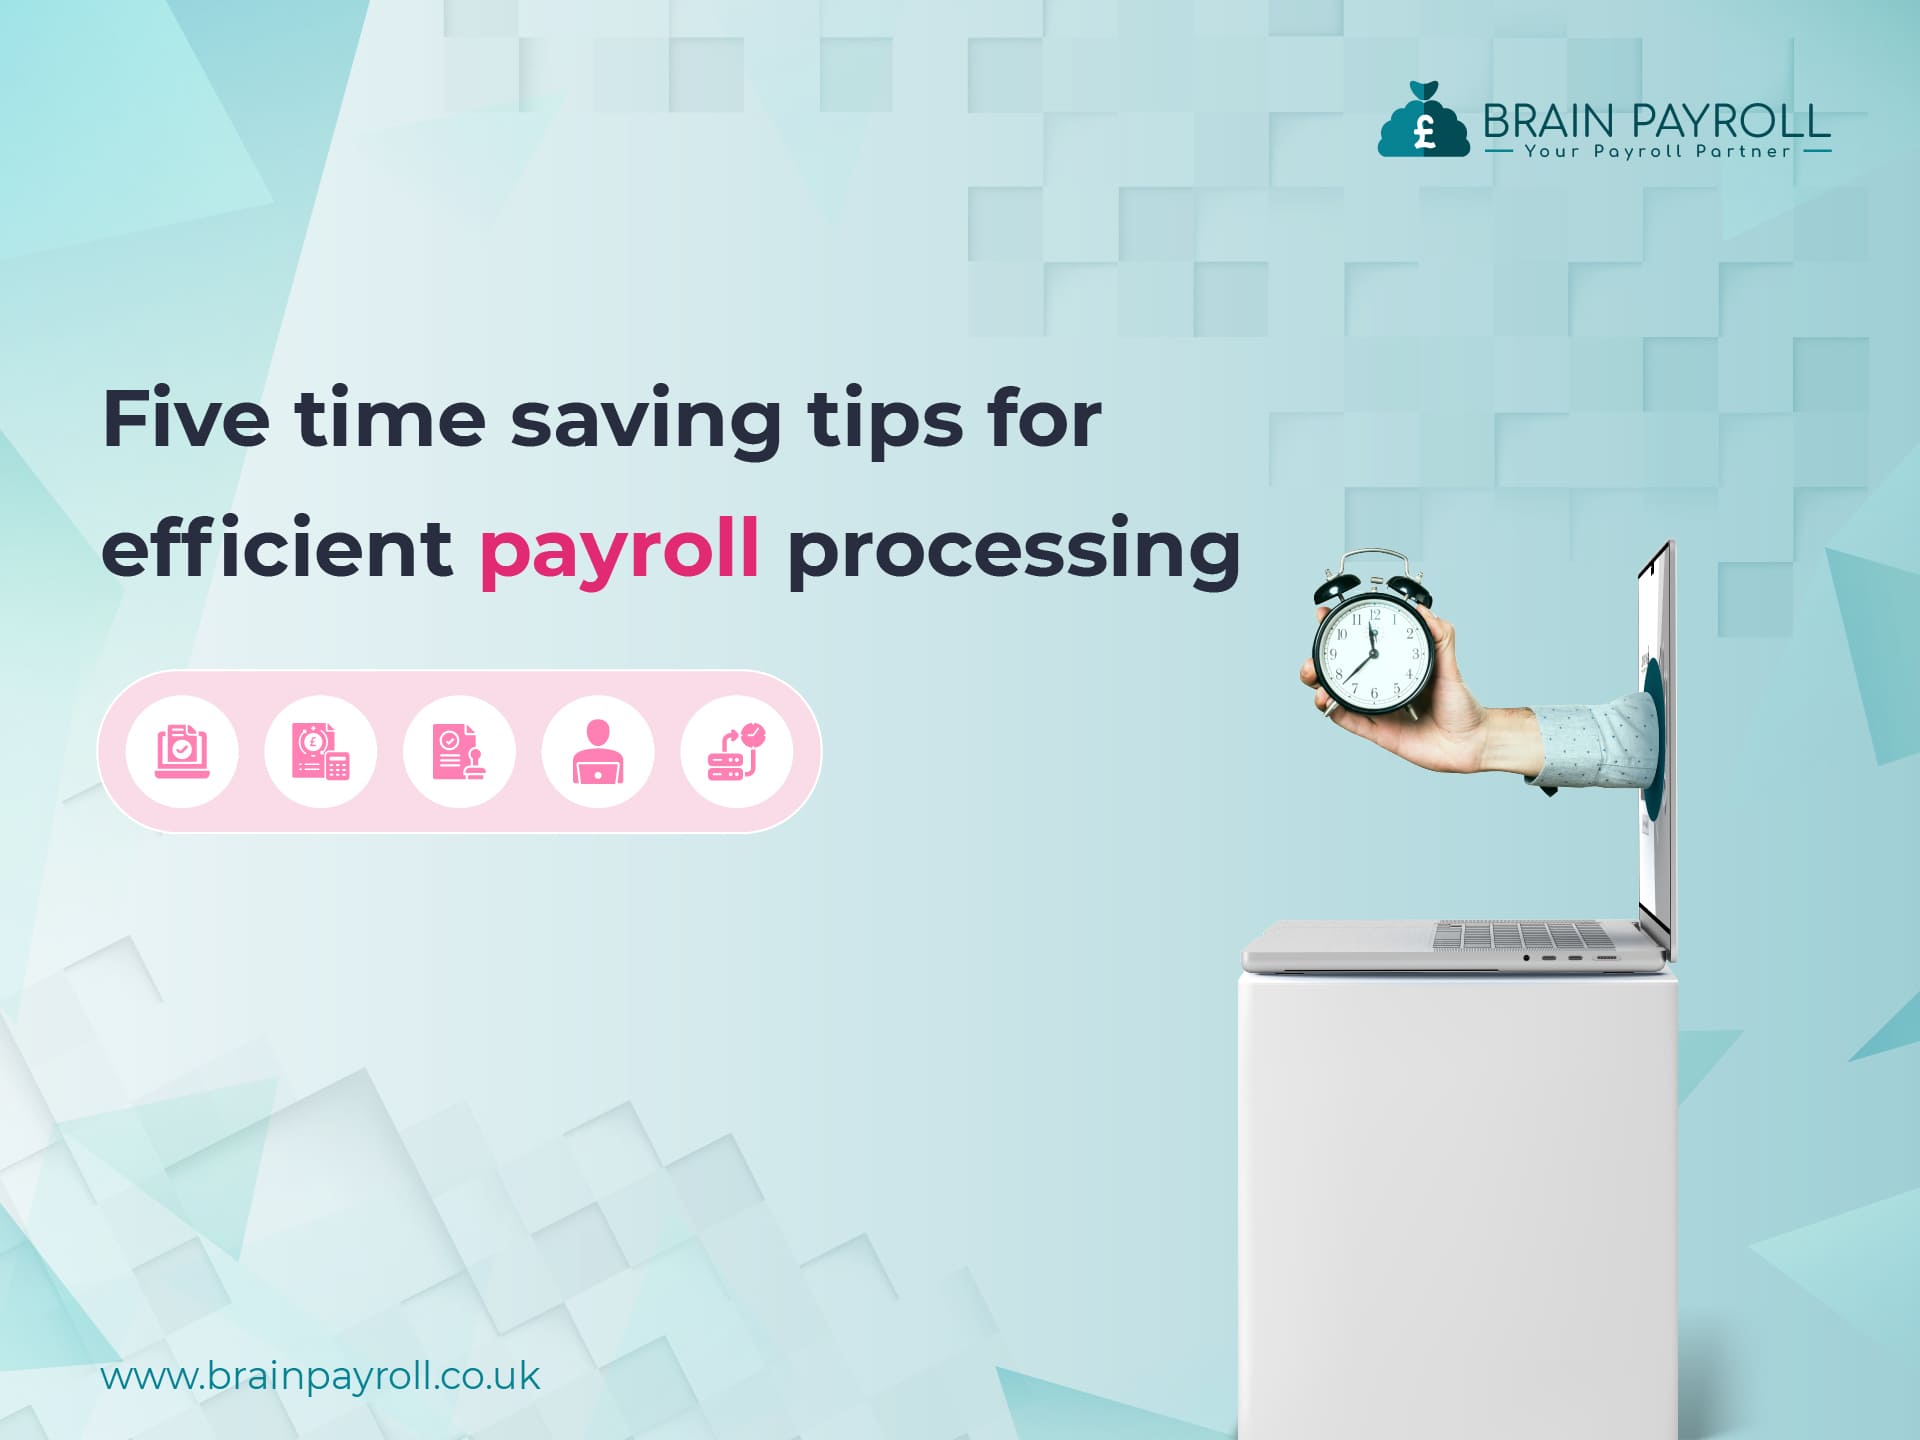 The Ultimate Guide to Handling Statutory Sick Pay (SSP) with Brain Payroll UK